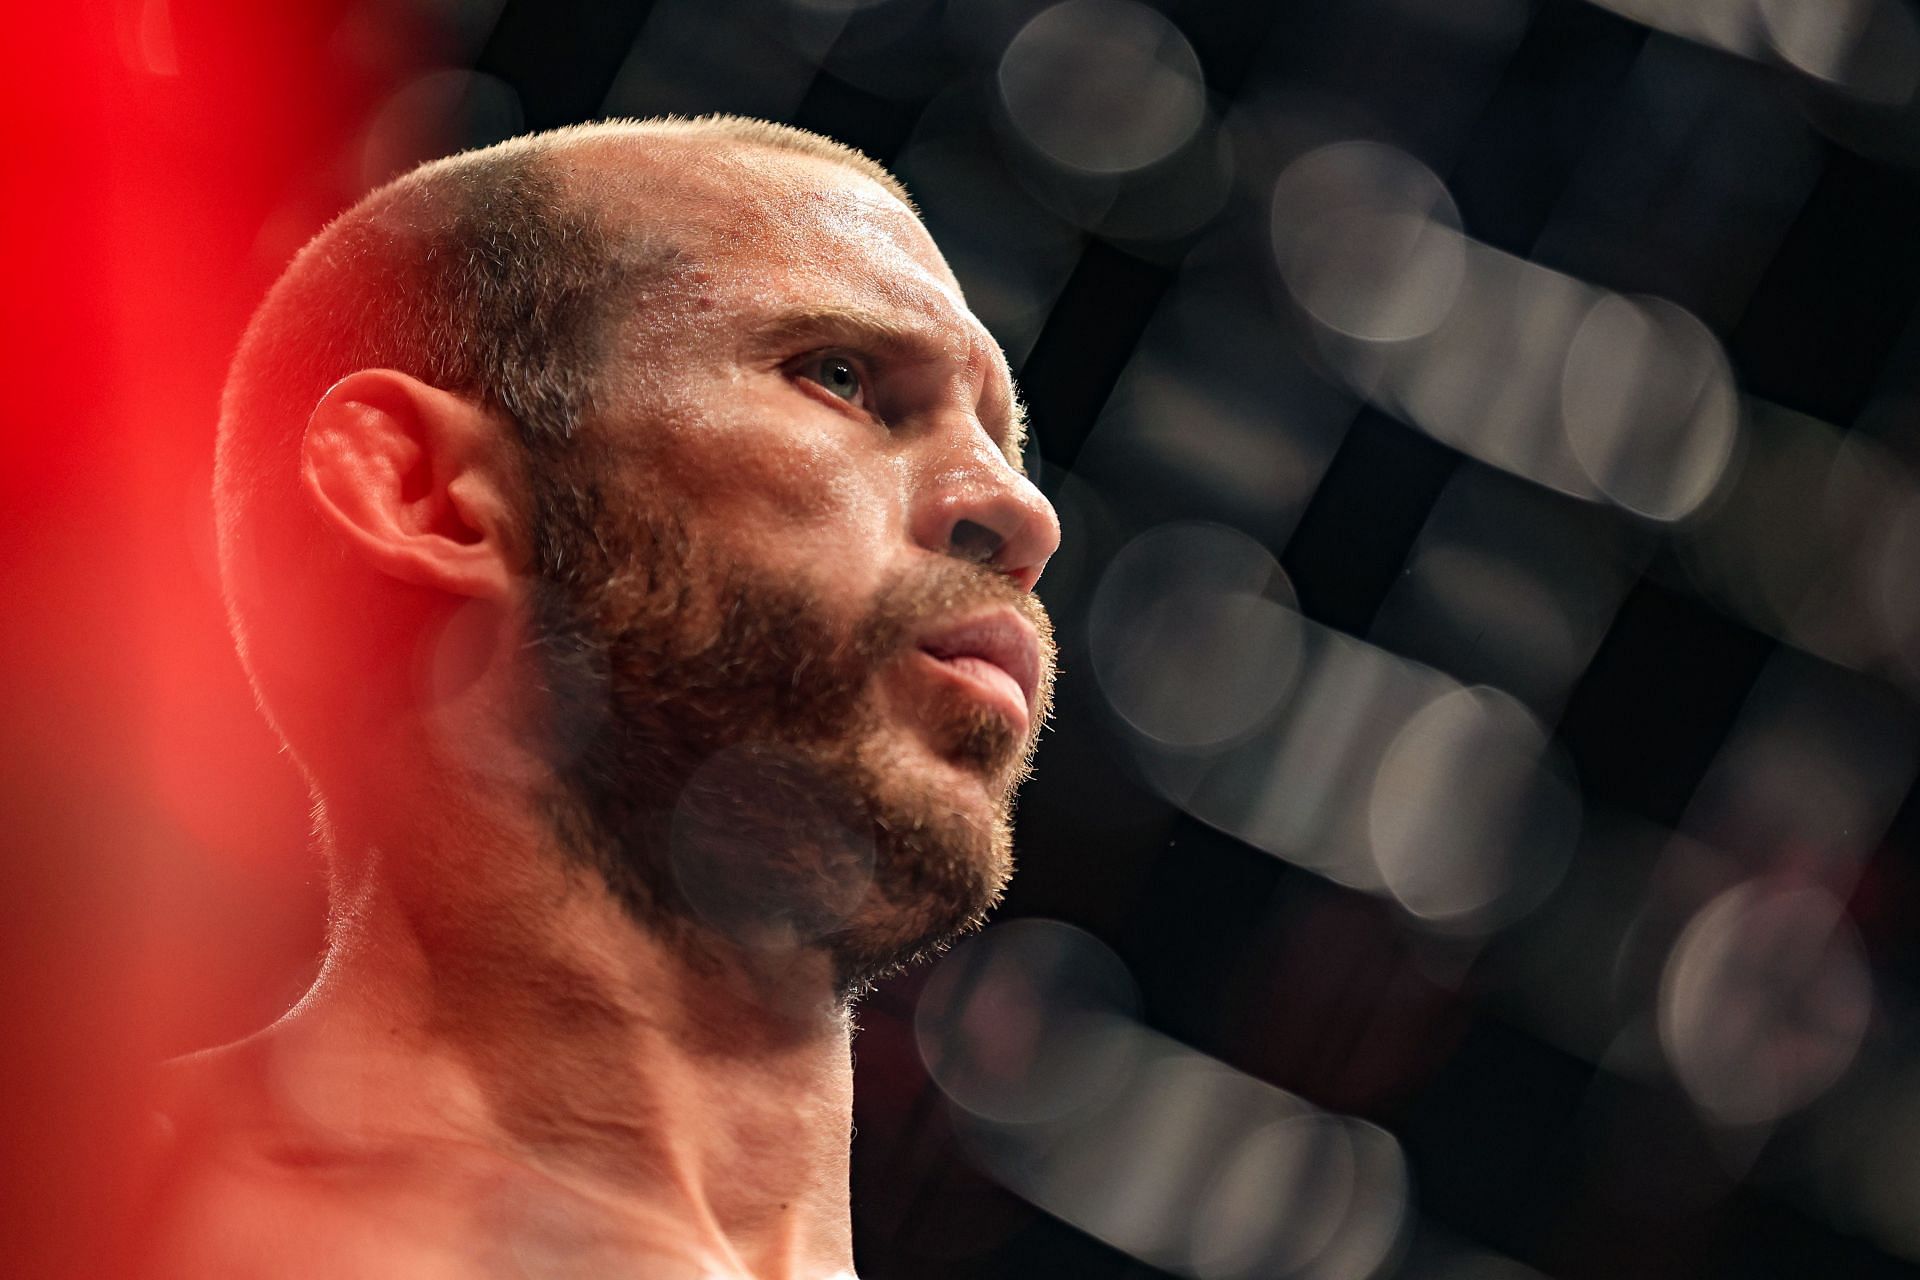 Donald Cerrone is using steroids after retirement